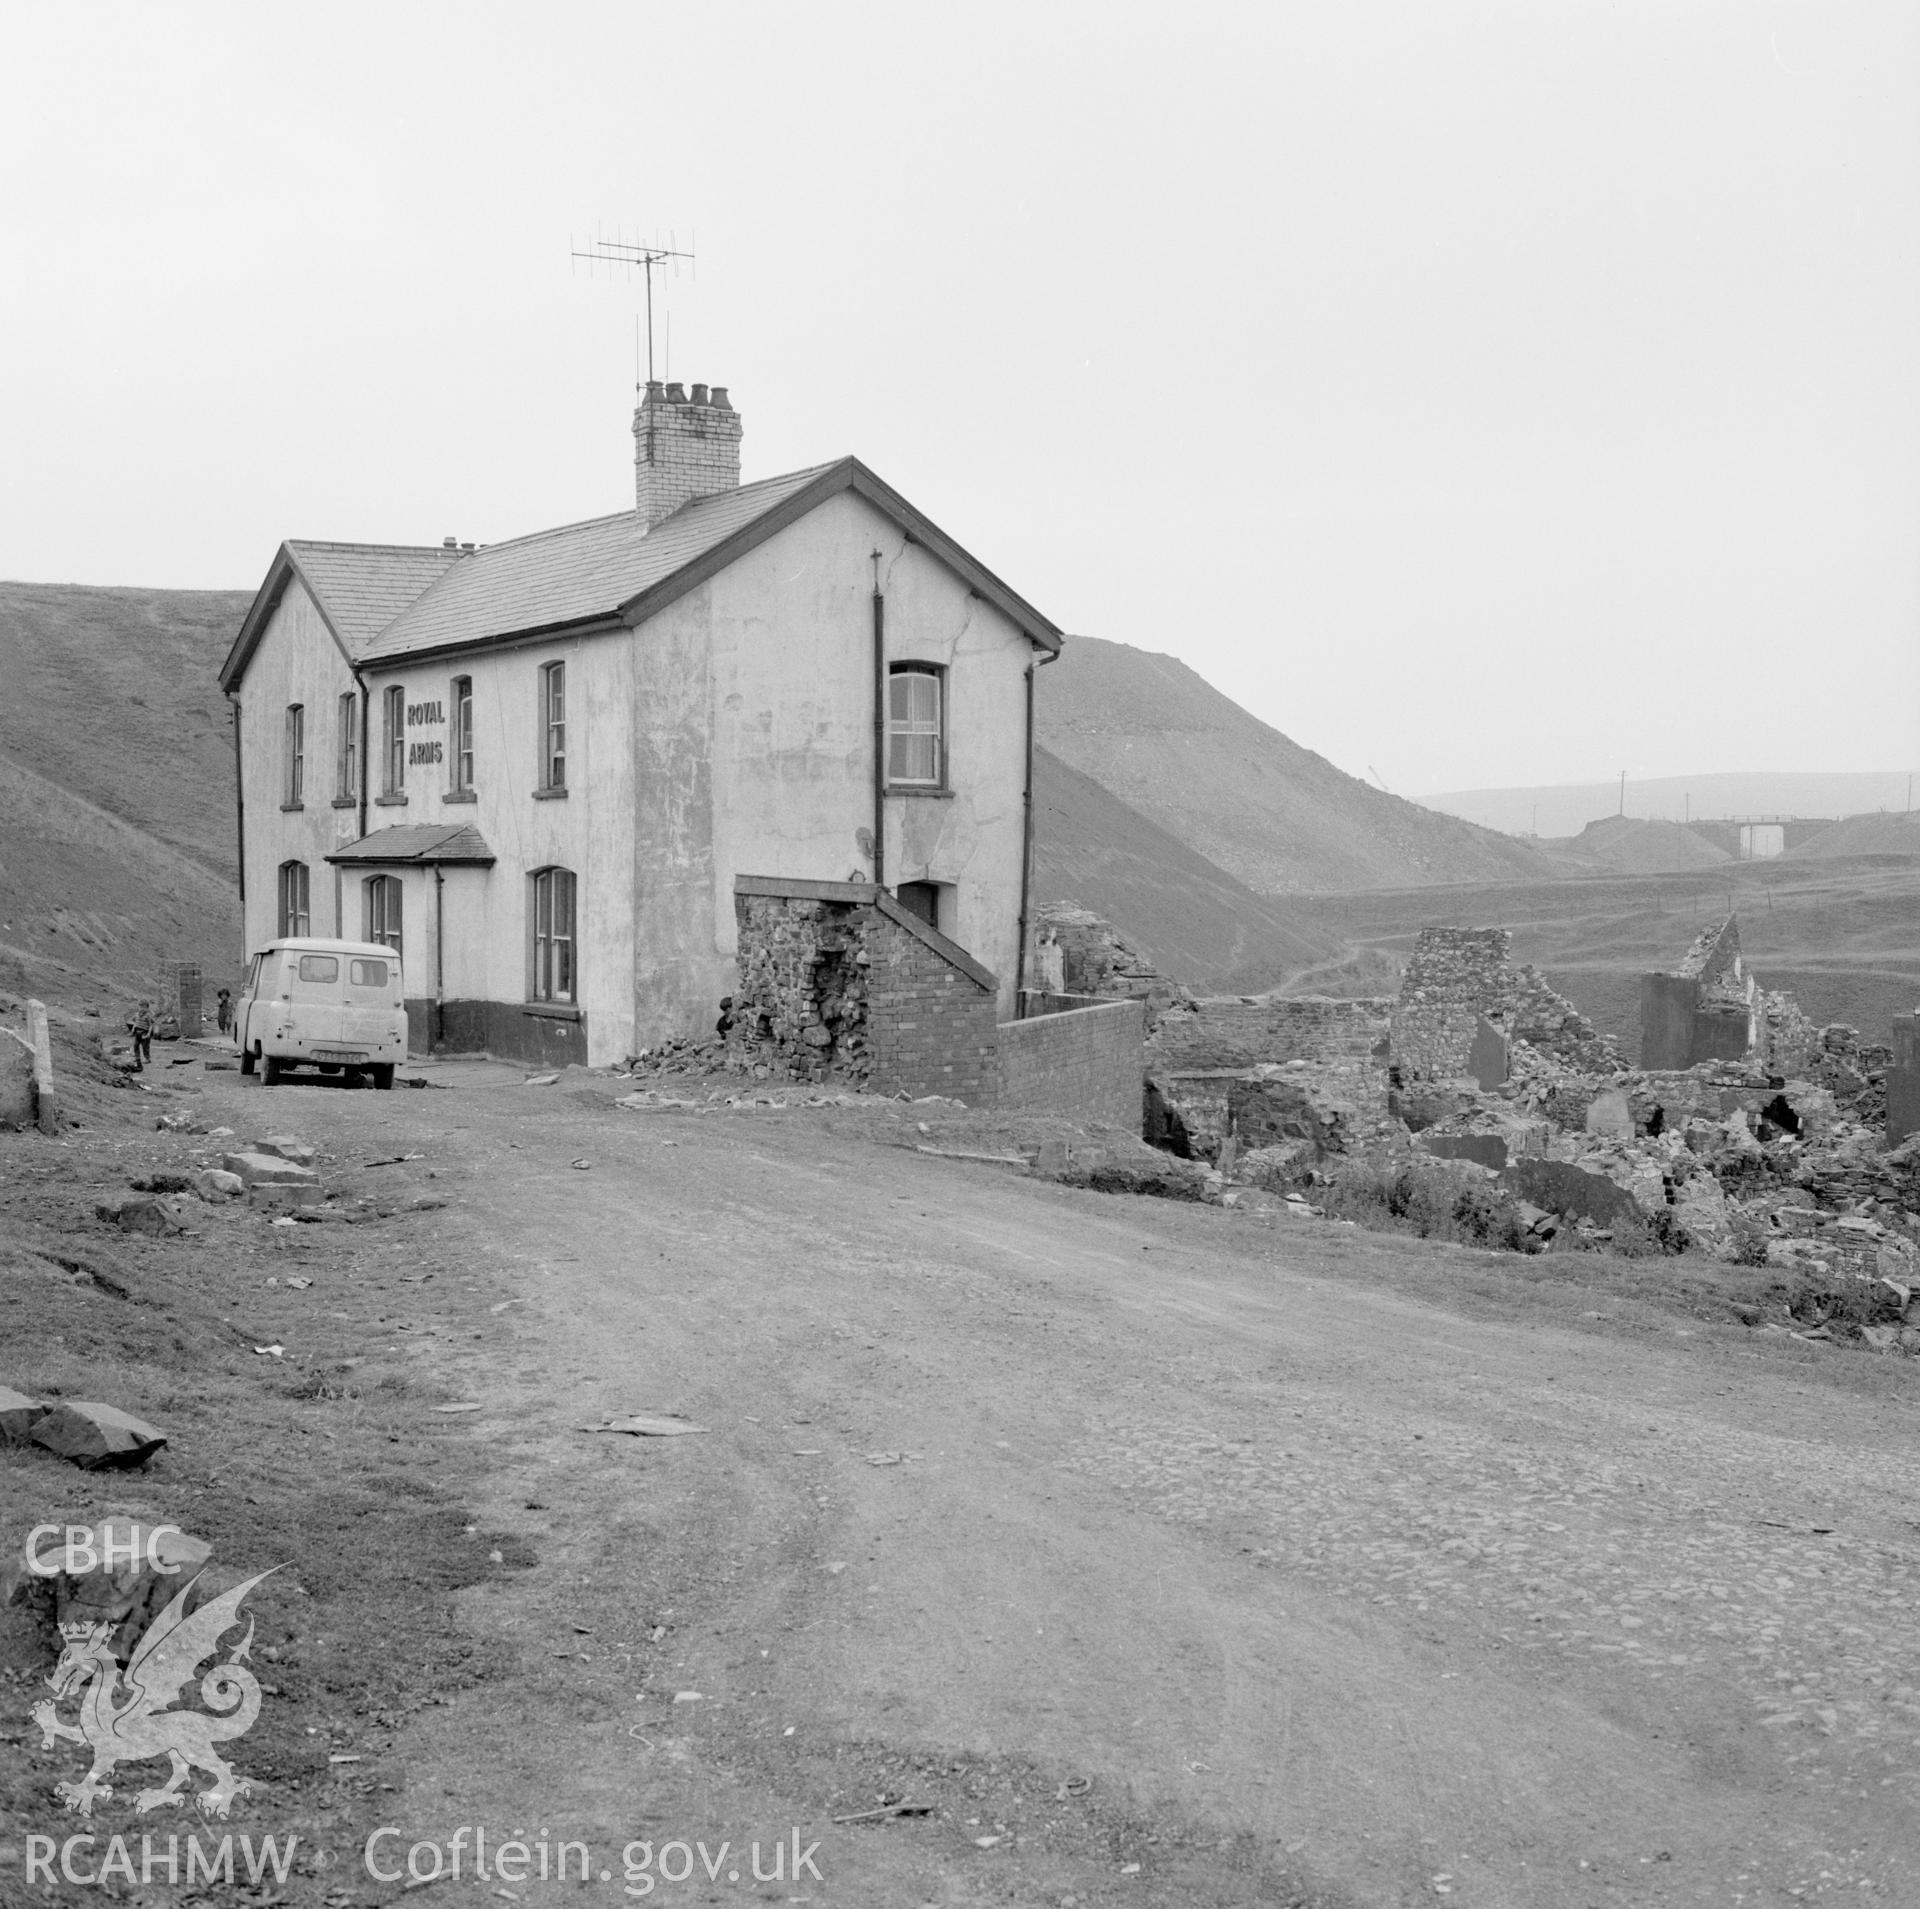 Digital copy of a black and white negative showing Royal Arms Hotel, taken by Douglas Hague, undated.